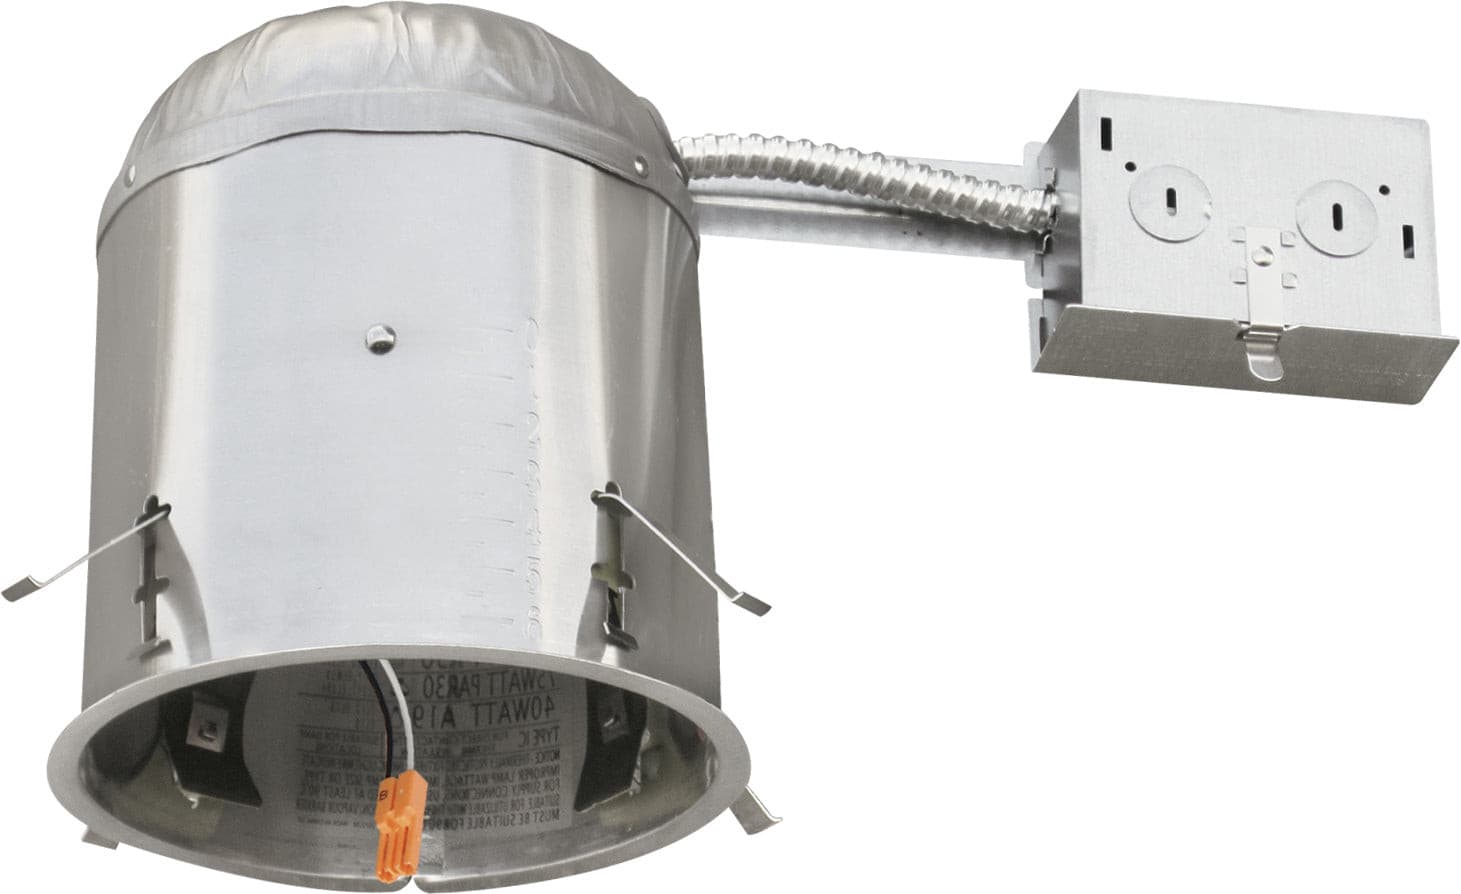 Elco 6" Remodel Dedicated IC Airtight Housing - EL770RICA, Suitable for Koto™ System - Sonic Electric